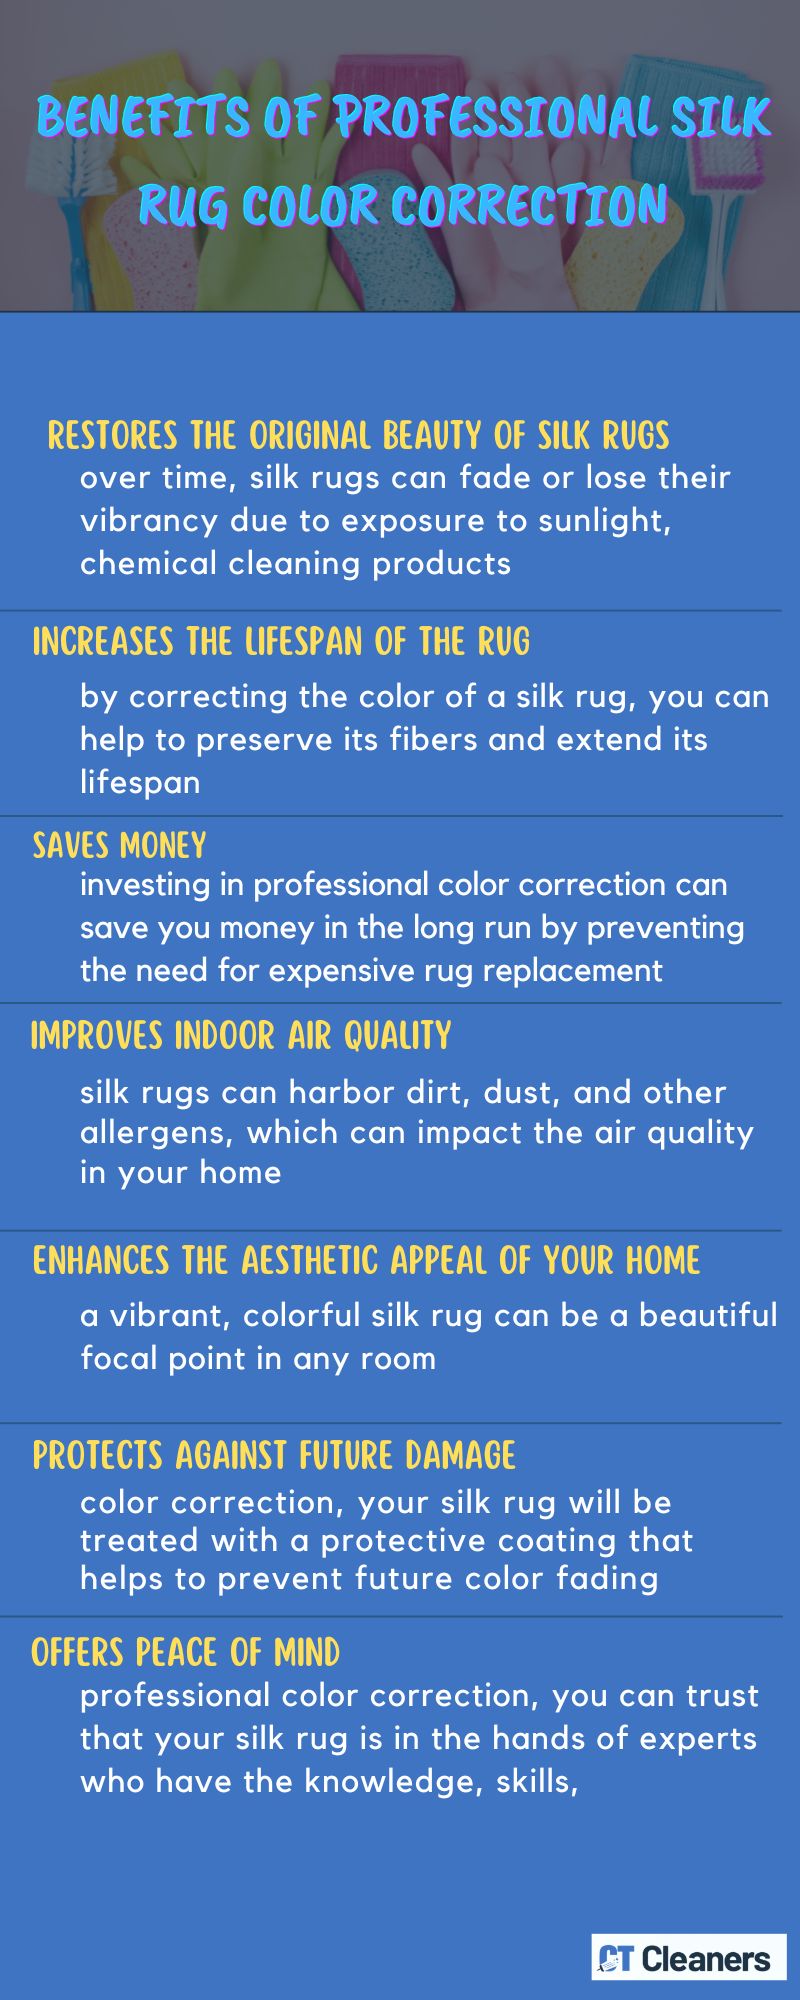 Benefits of Professional Silk Rug Color Correction